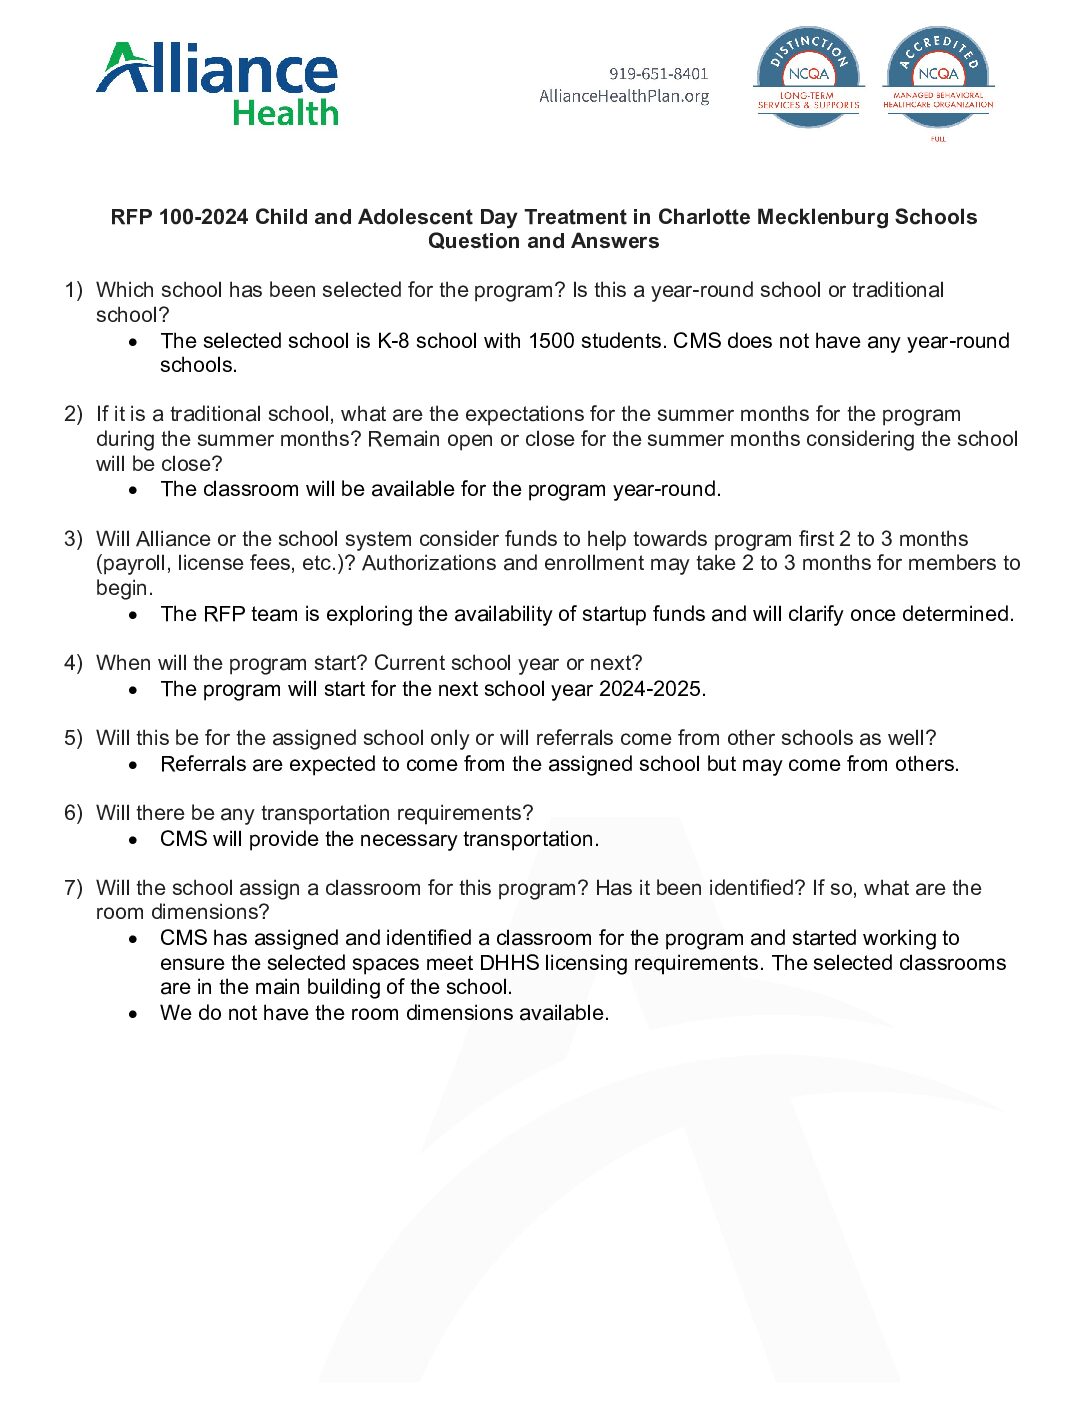 RFP 100-2024 Child and Adolescent Day Treatment in Charlotte Mecklenburg Schools Question and Answers